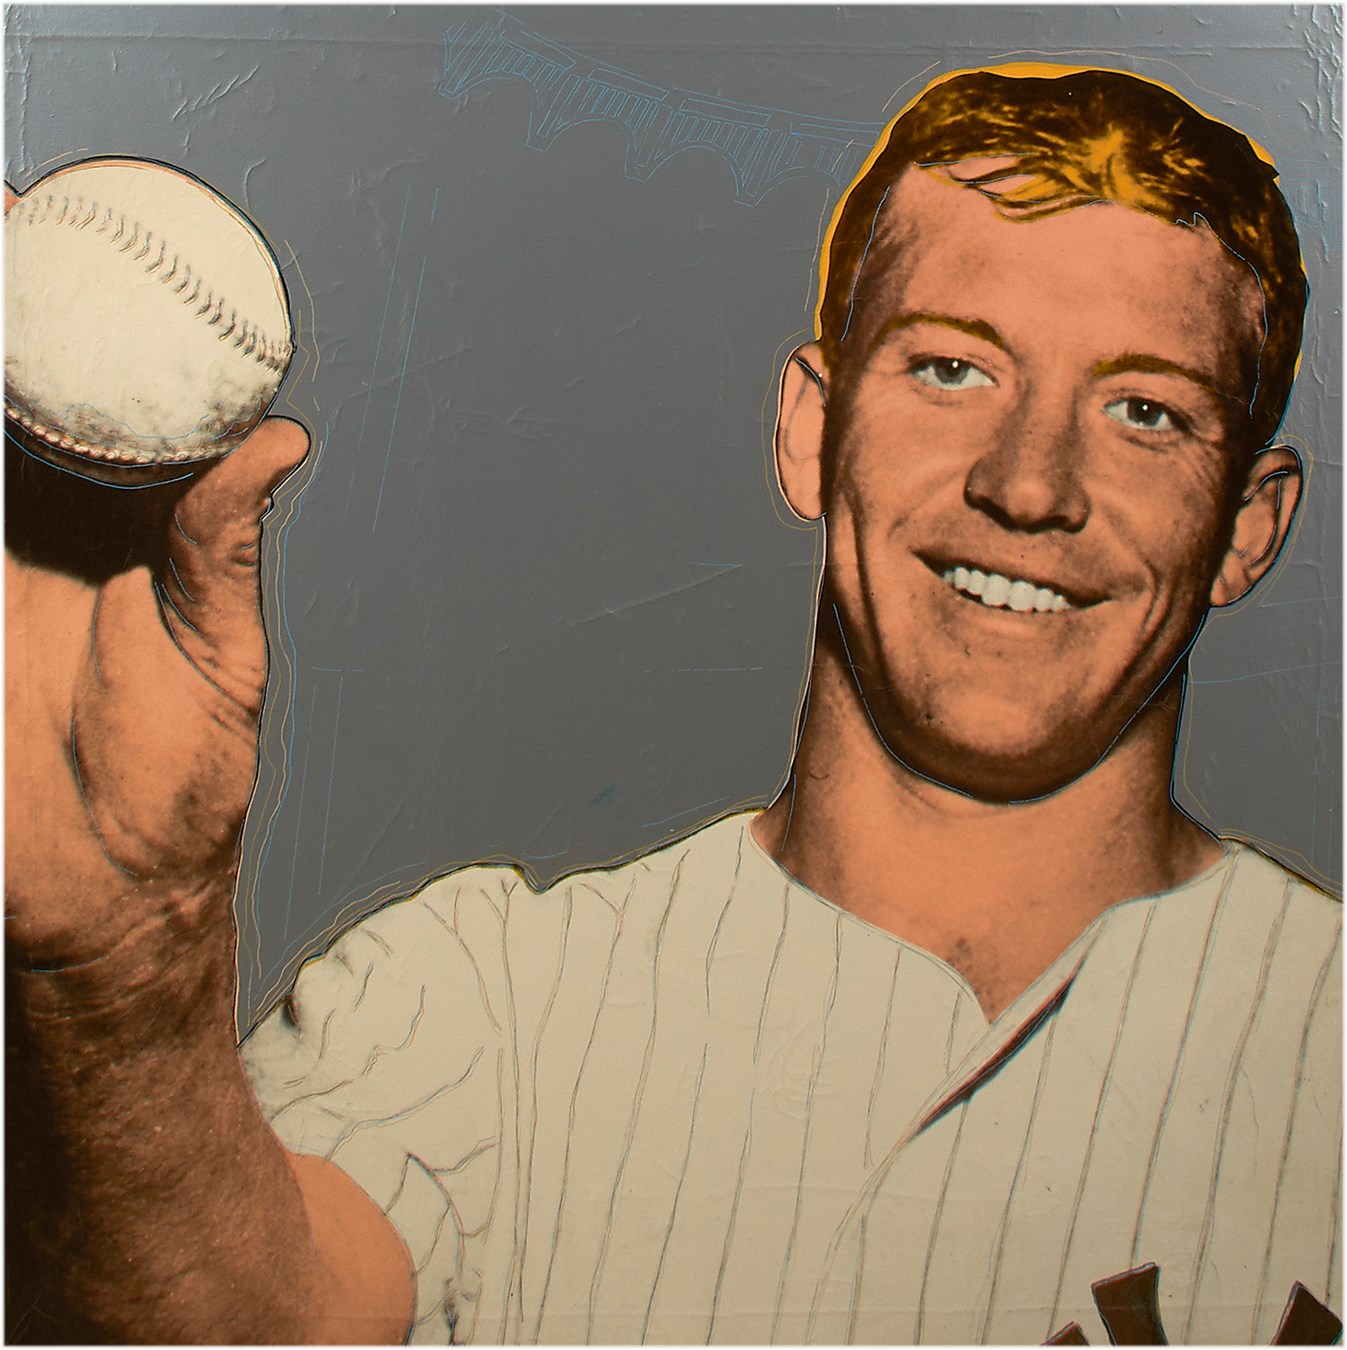 - Mickey Mantle Handpainted Oil Over Silkscreen Painting by Steve Kaufman - Mickey's Personal Copy That Hung on His Wall